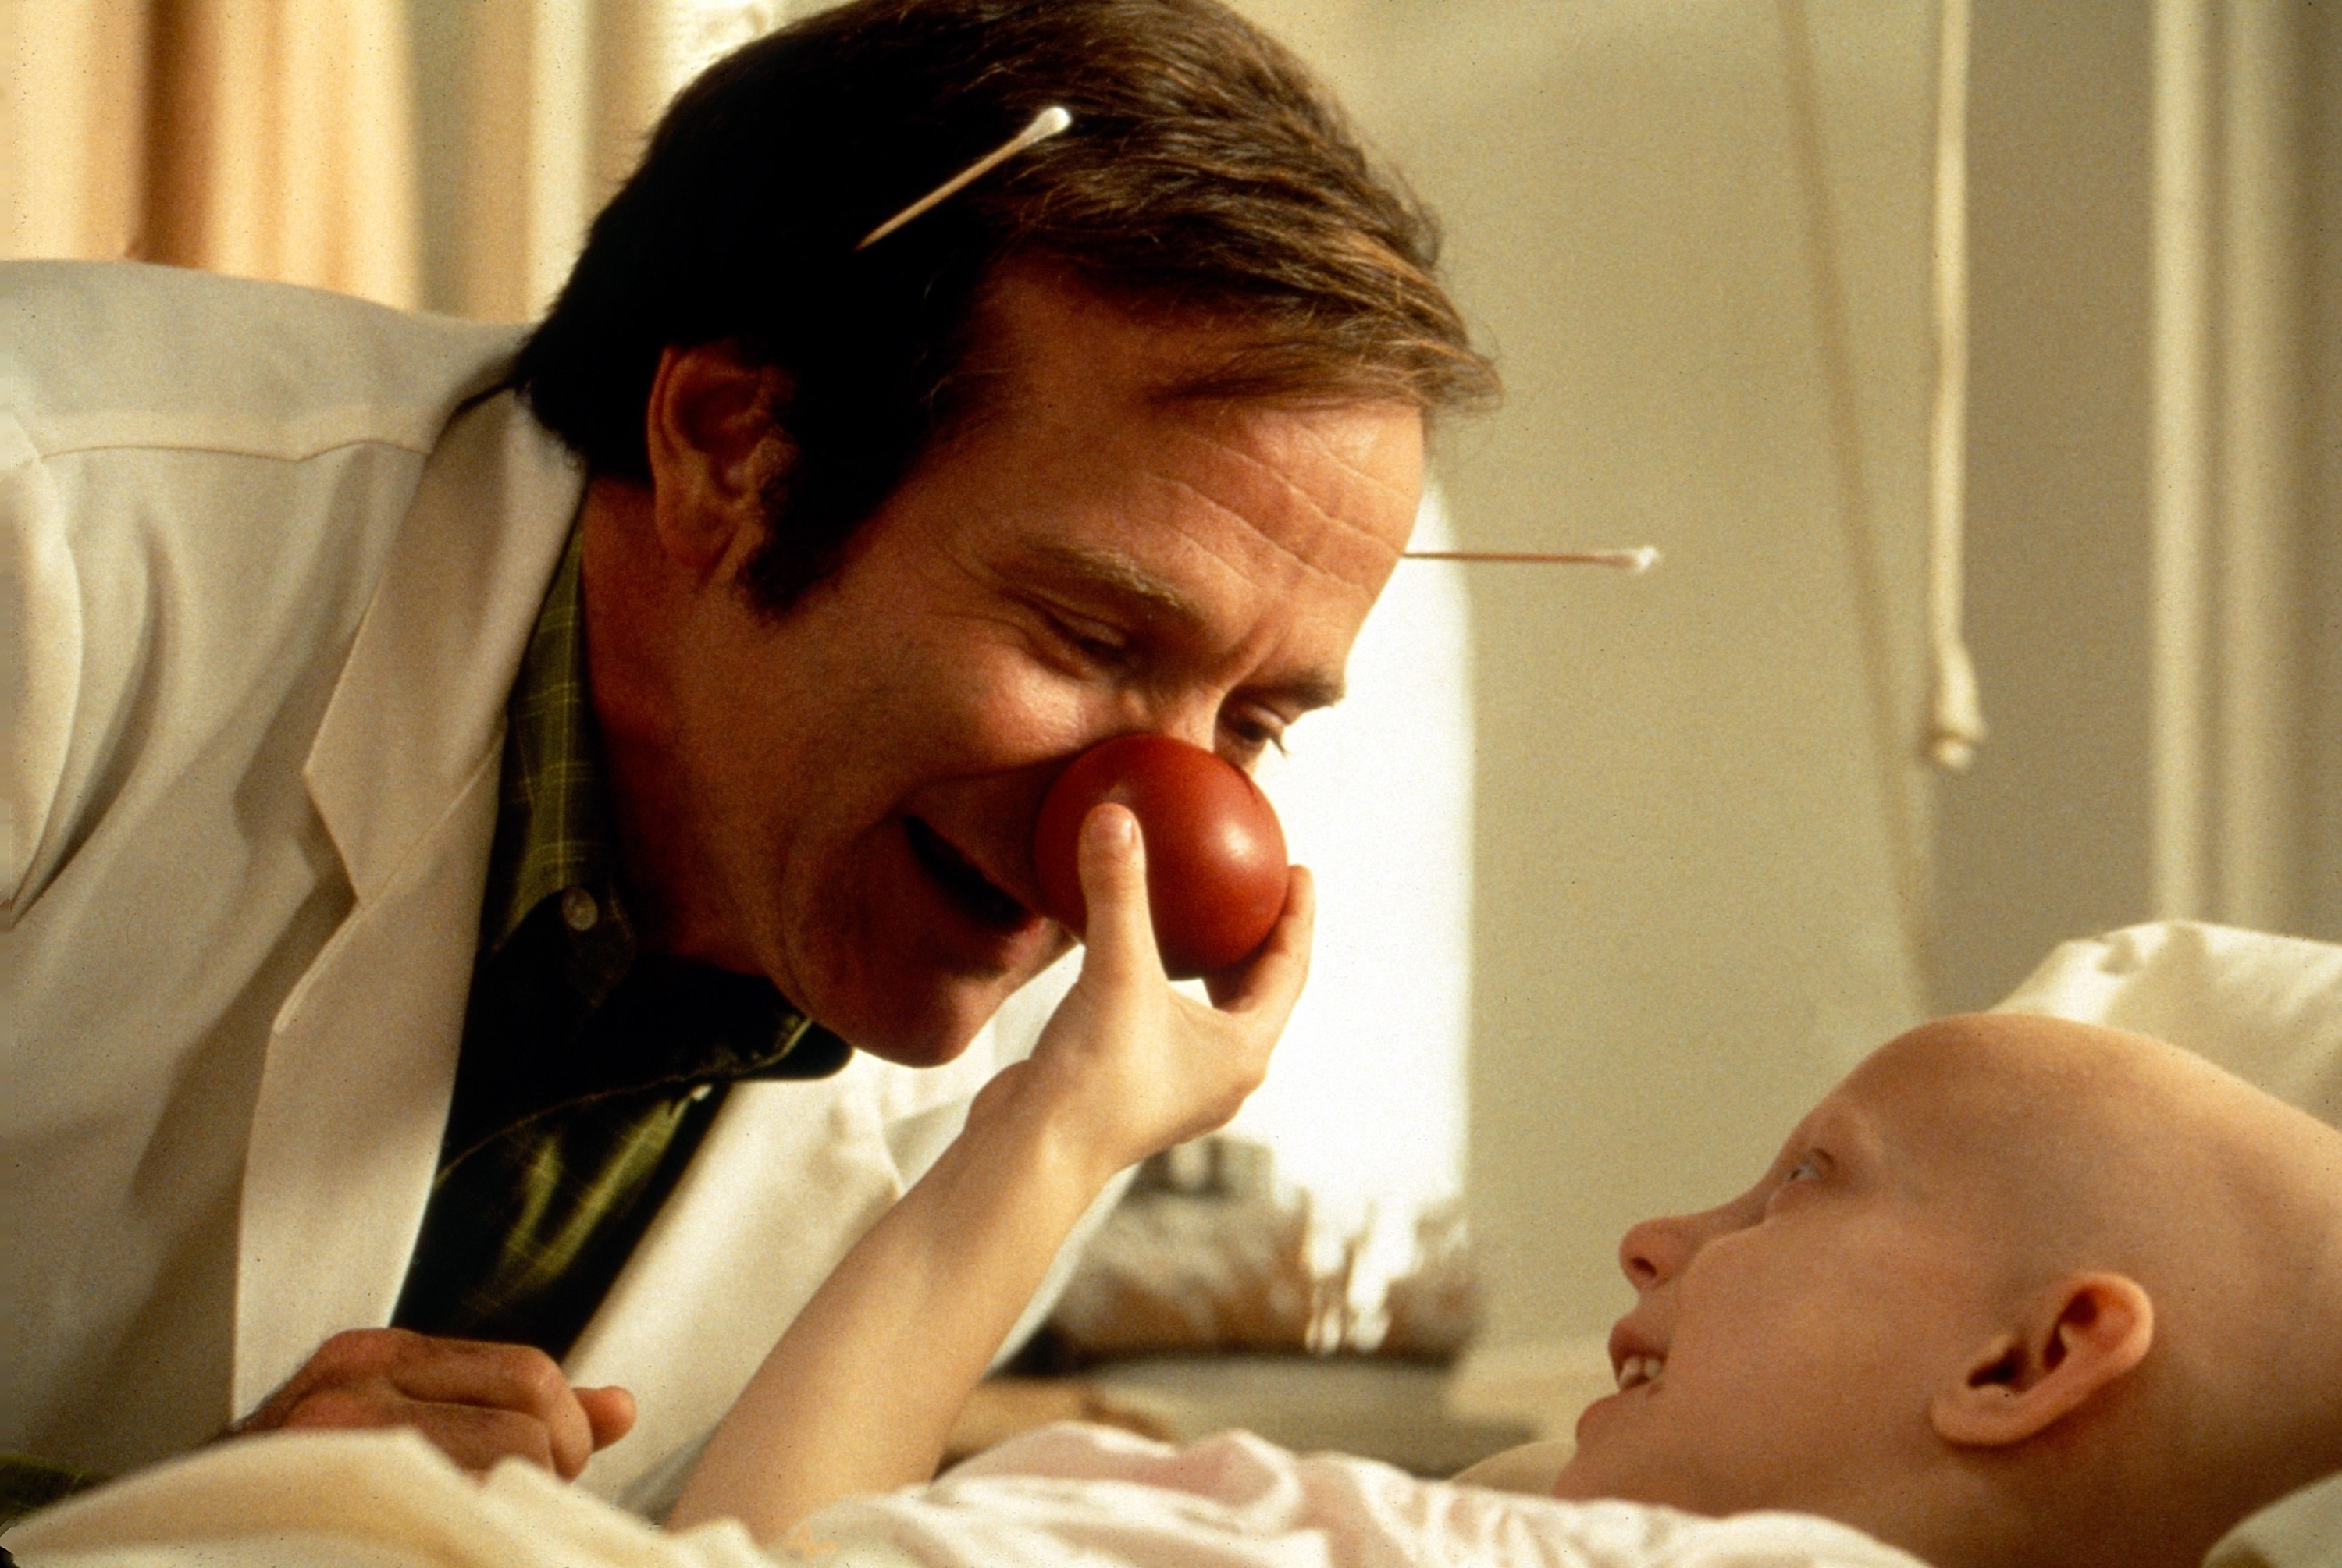 A man with a clown nose tends to a patient